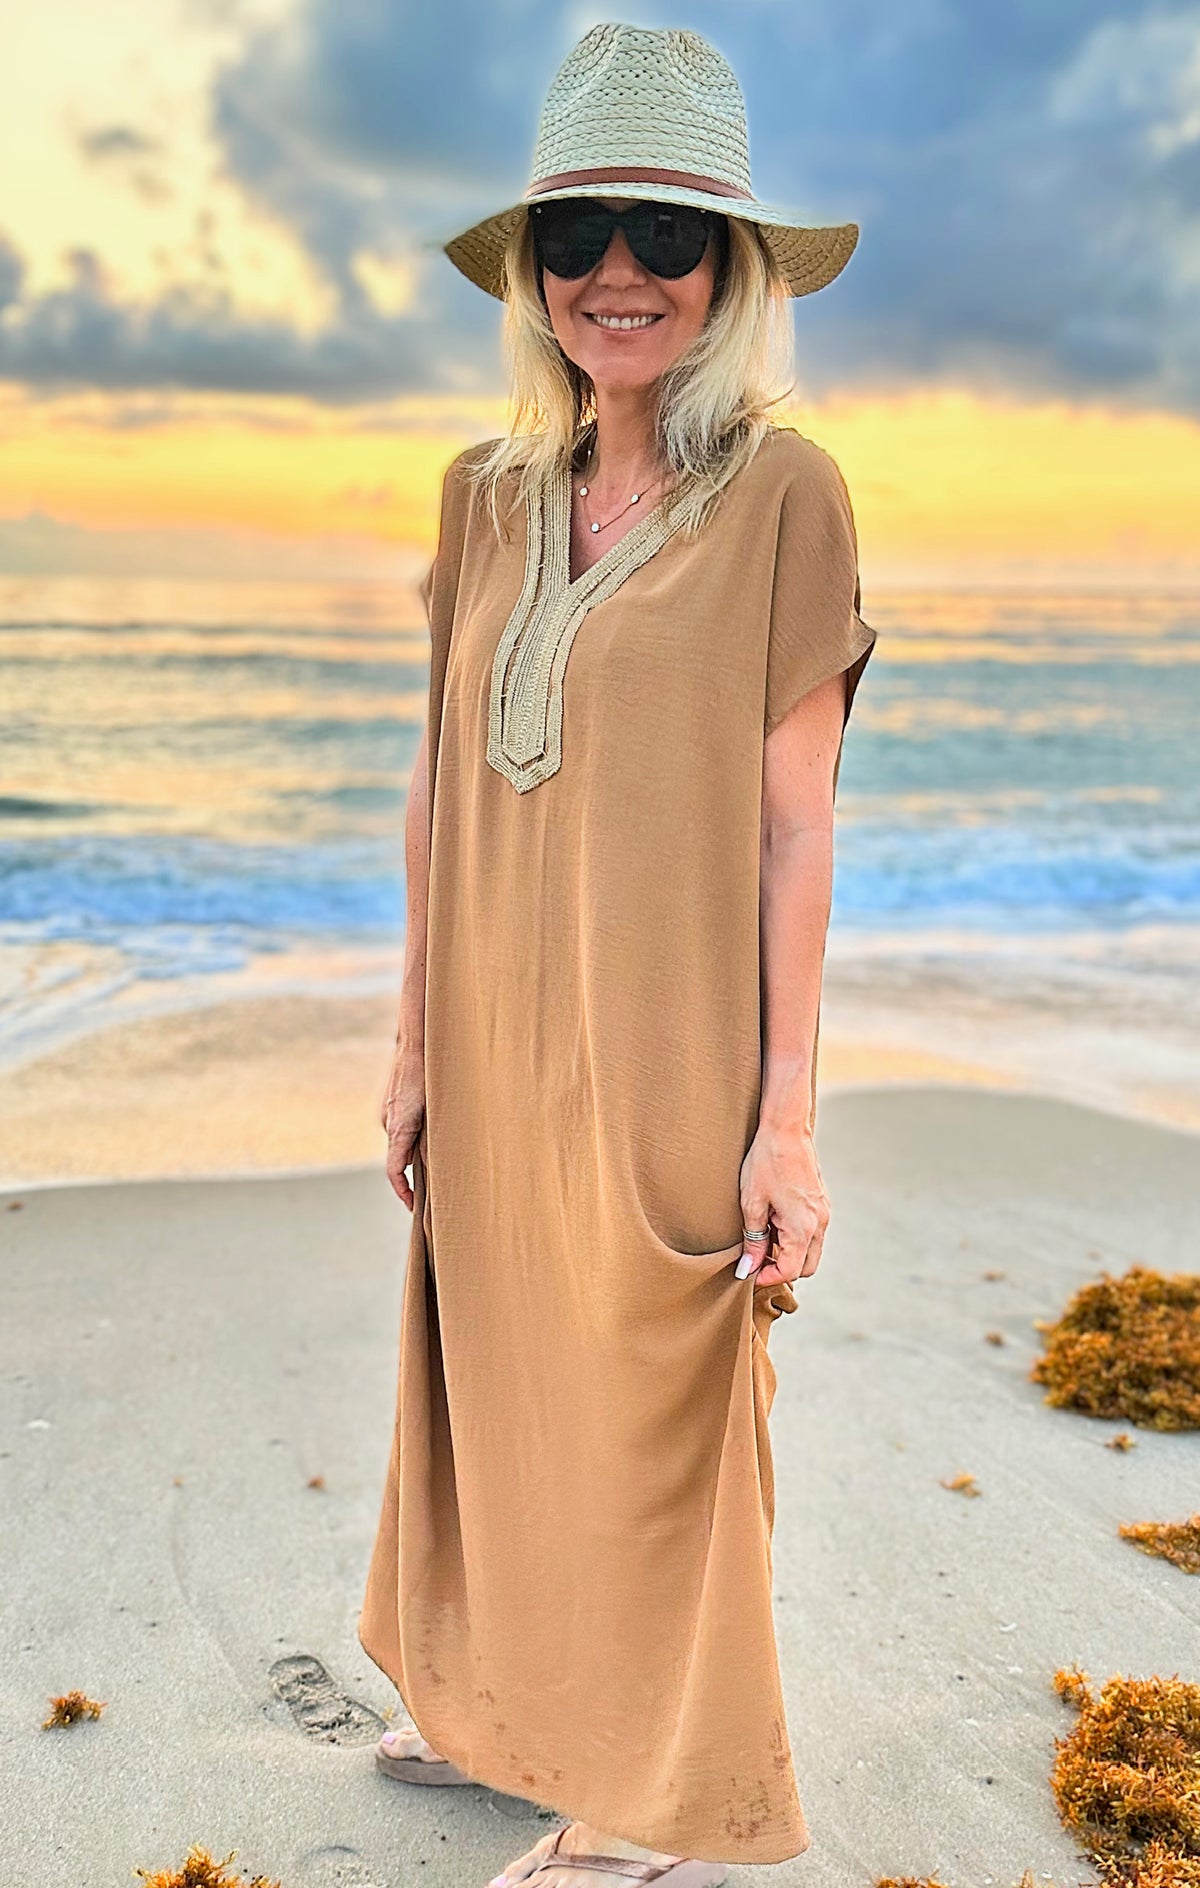 Greek Goddess Kaftan Dress - Camel-200 dresses/jumpsuits/rompers-Venti6 Outlet-Coastal Bloom Boutique, find the trendiest versions of the popular styles and looks Located in Indialantic, FL